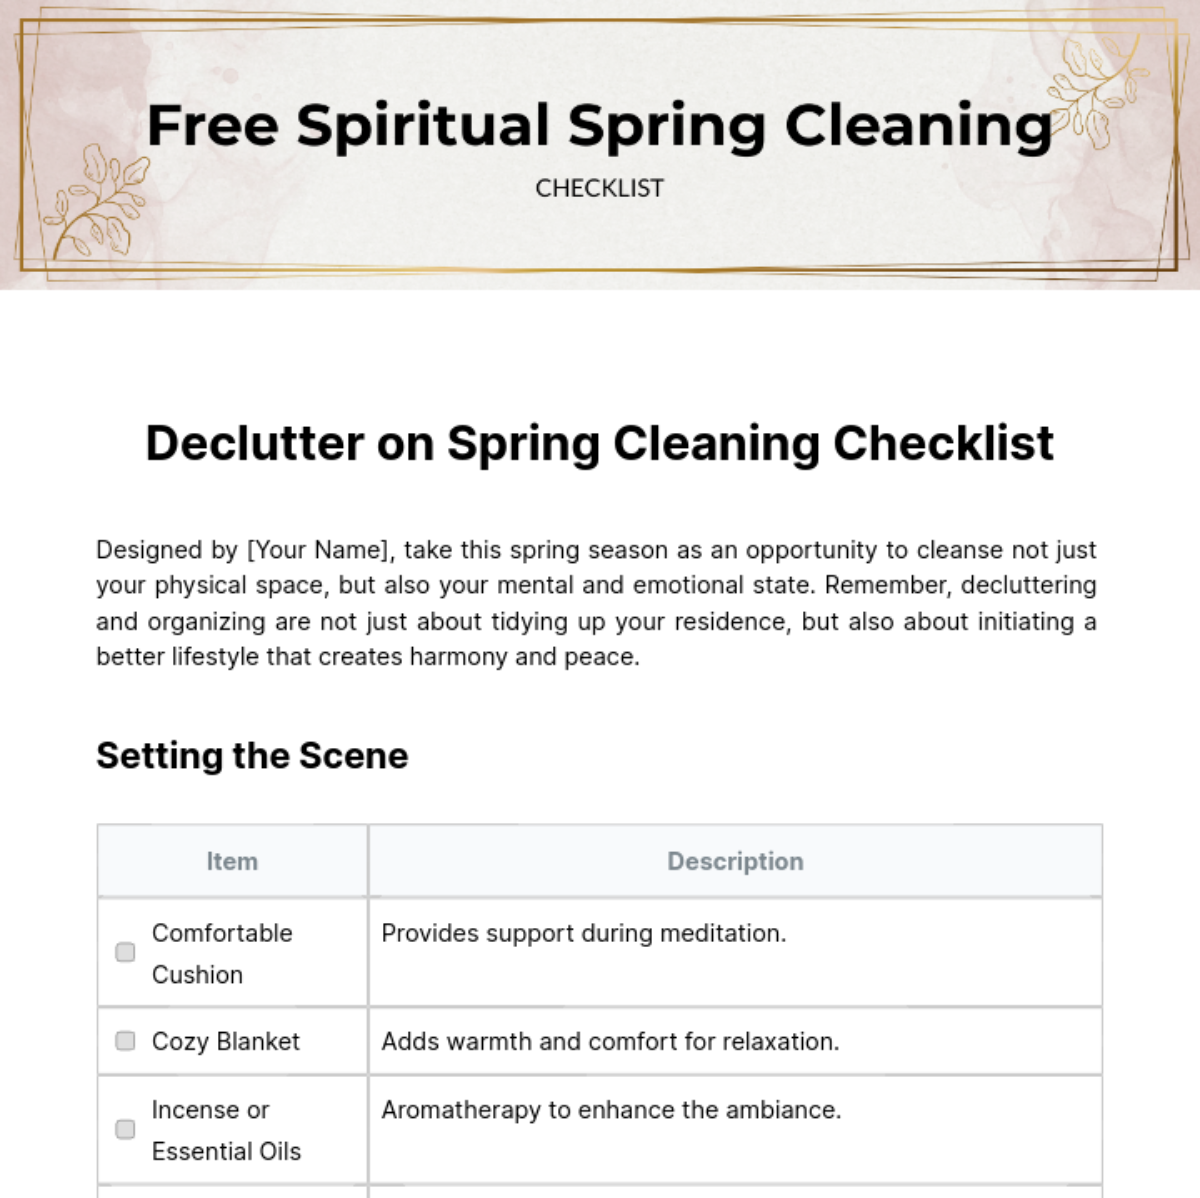 Spiritual Spring Cleaning Checklist Template